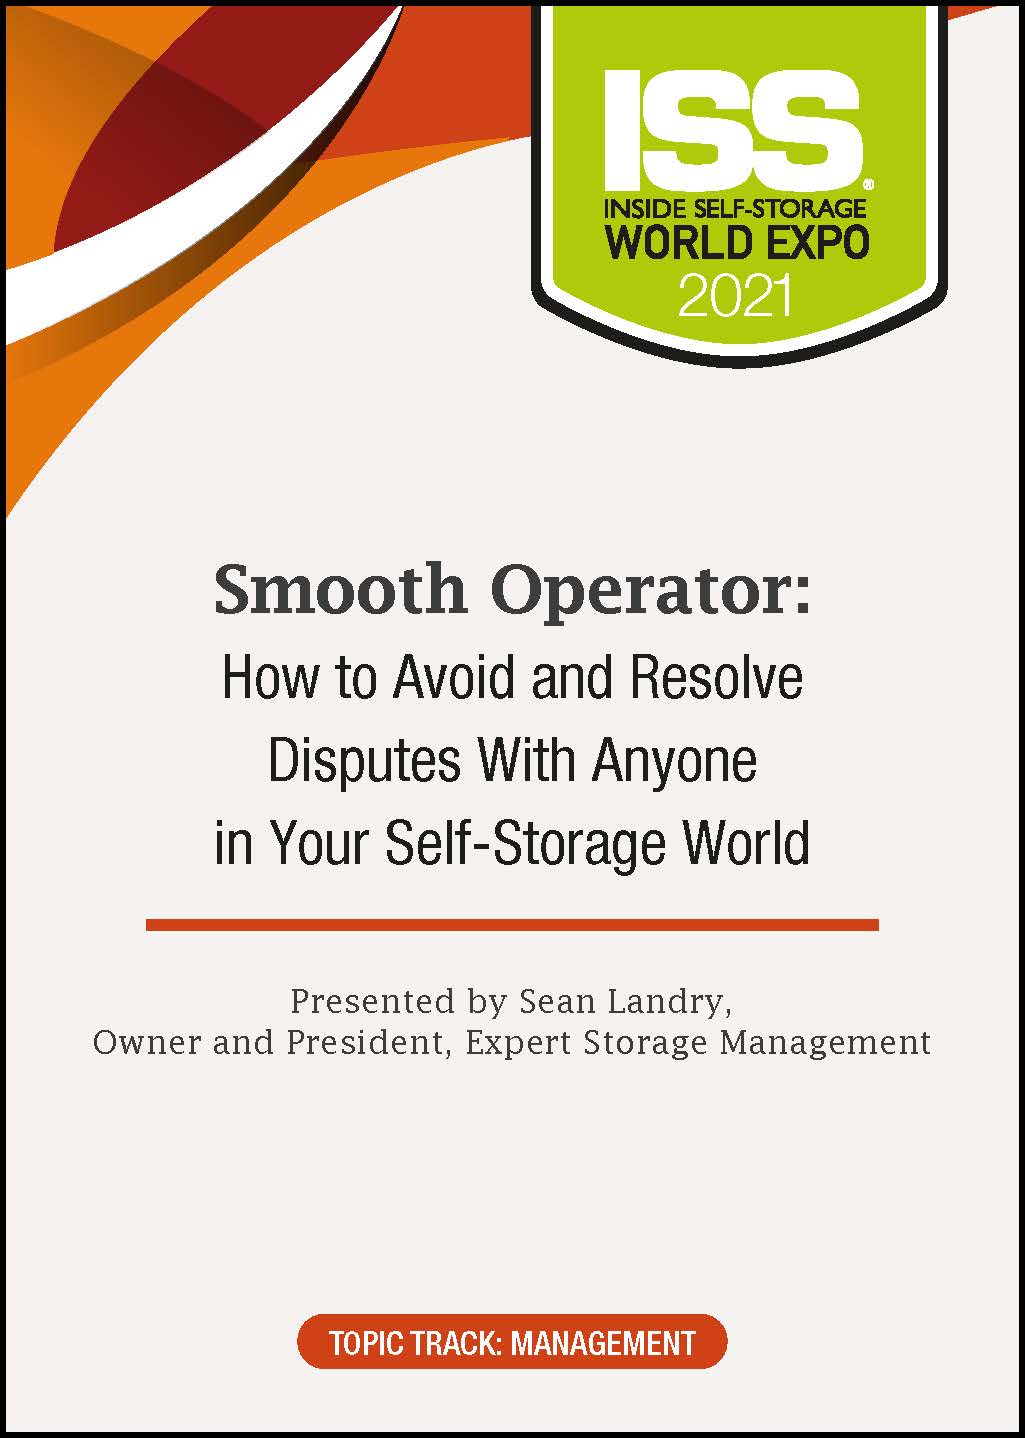 Smooth Operator: How to Avoid and Resolve Disputes With Anyone in Your Self-Storage World